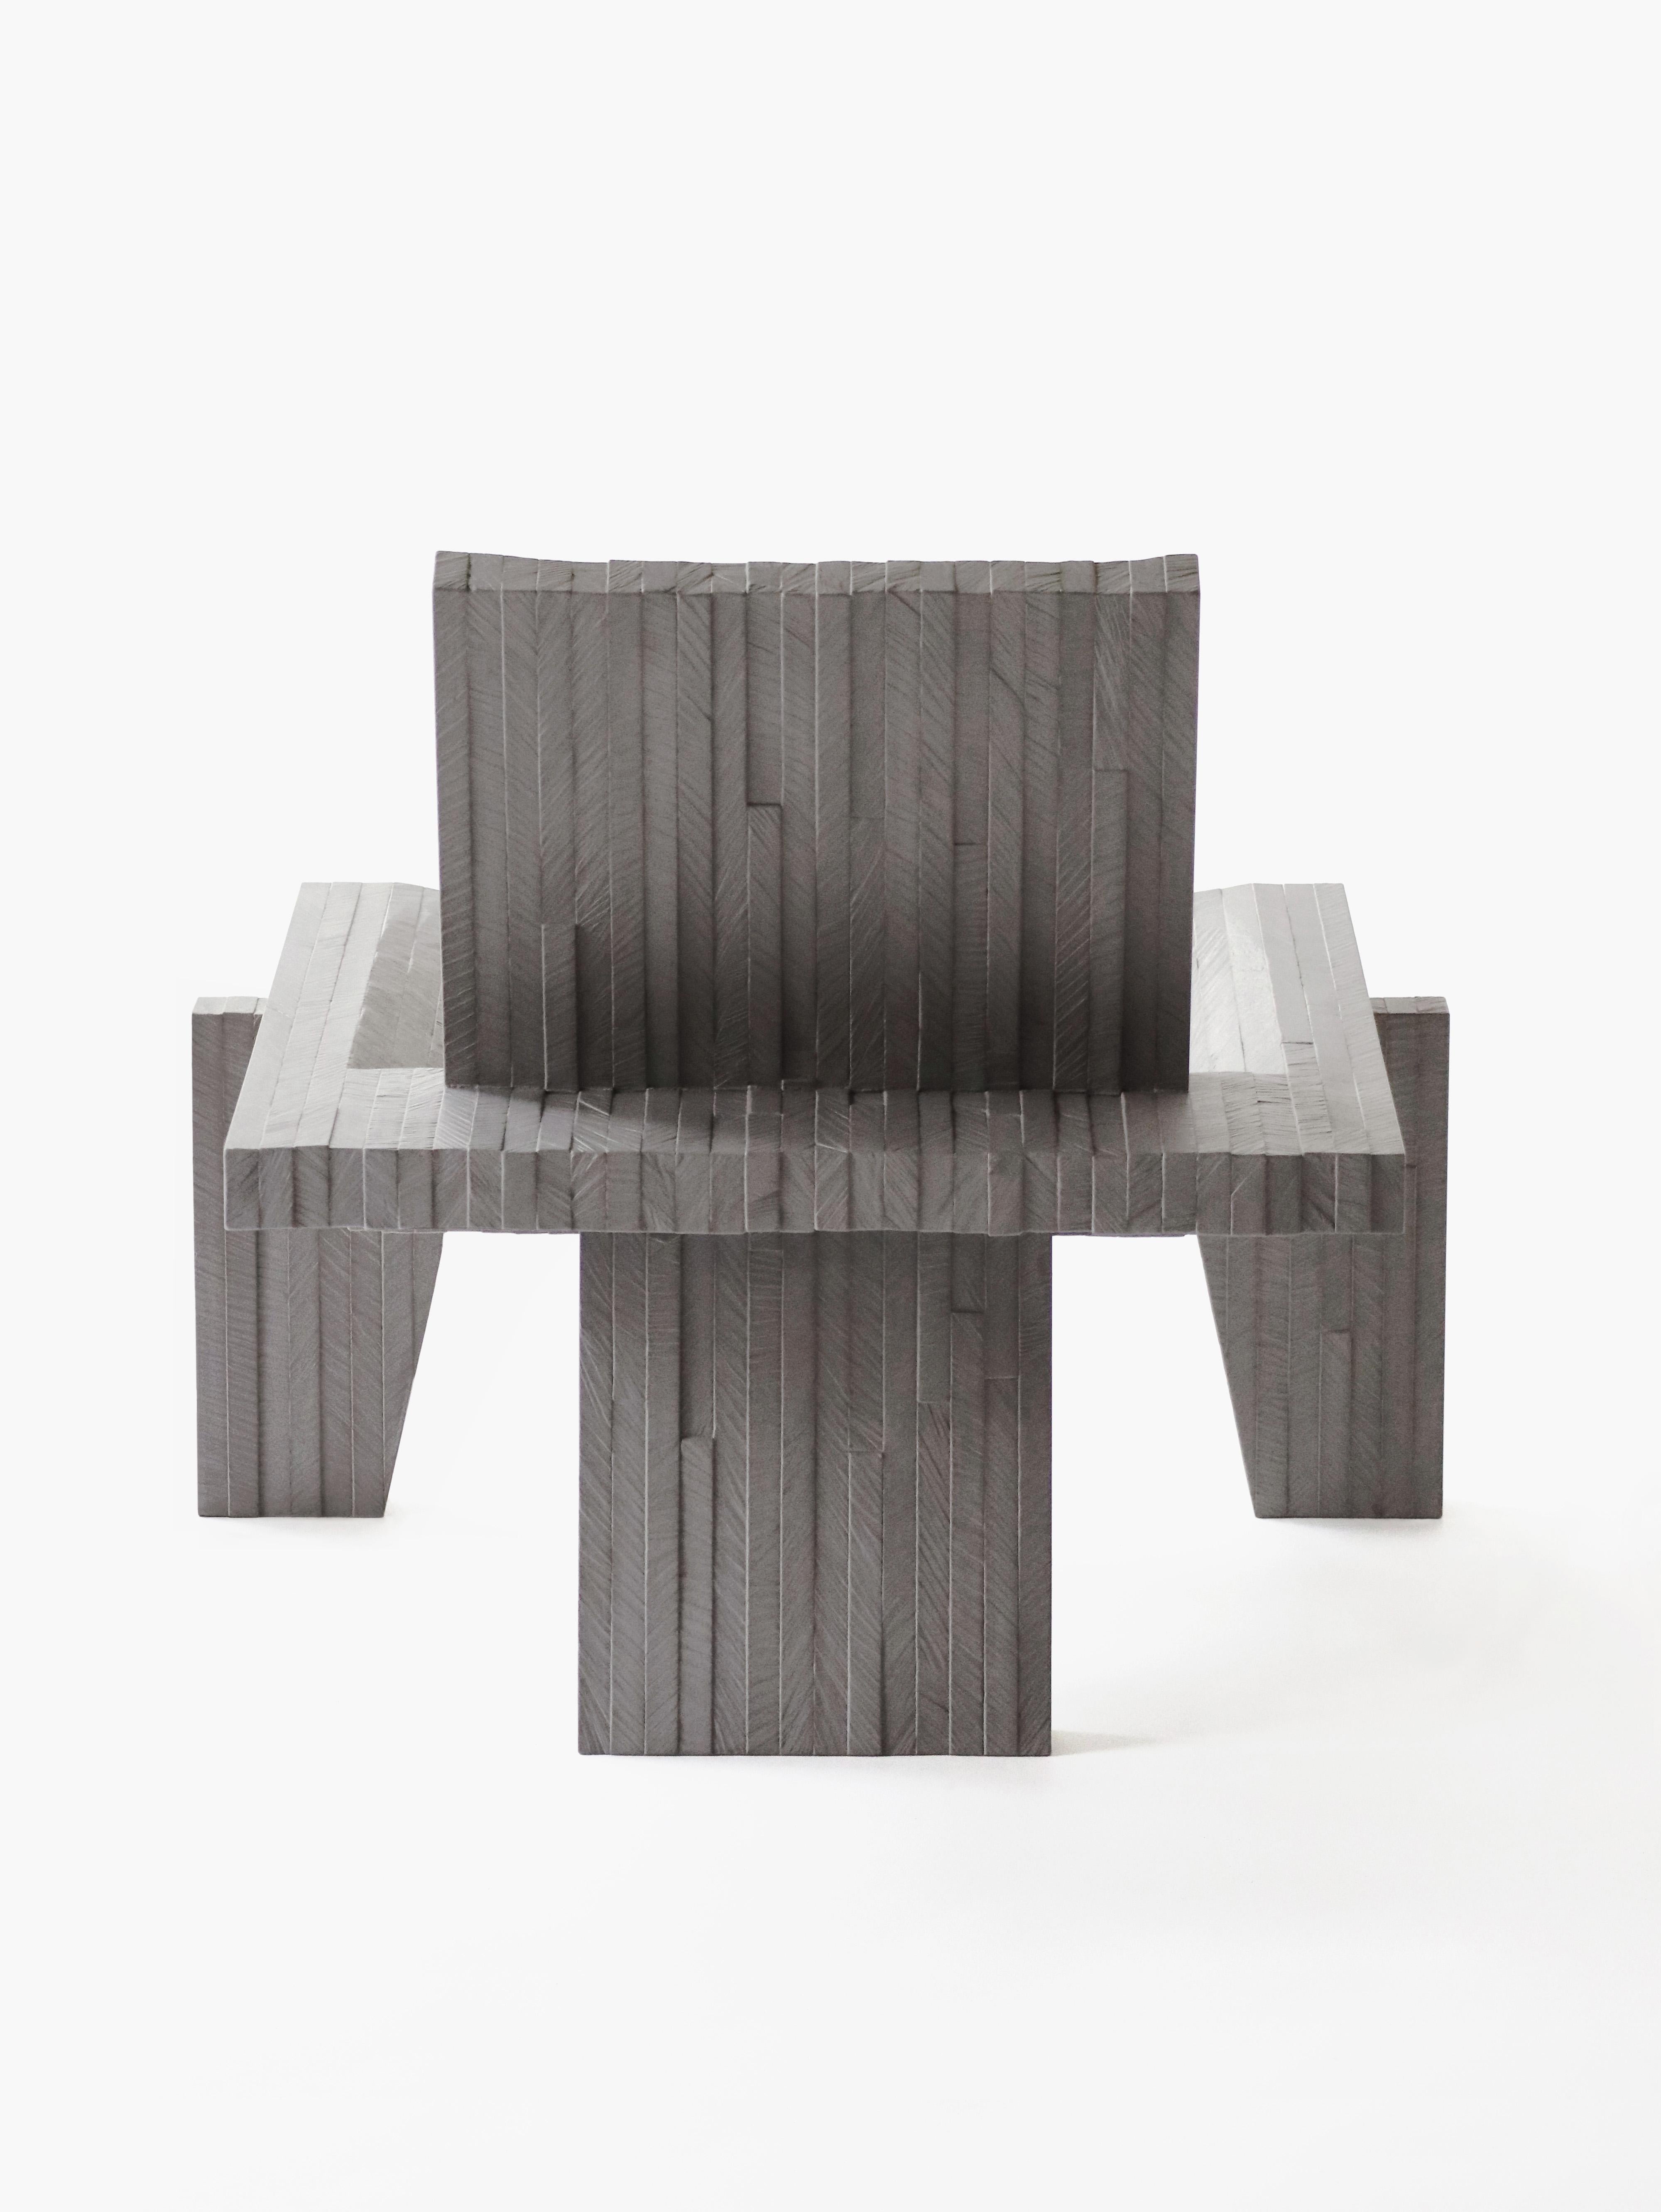 Belgian Hand-Crafted Wooden Chair, 'BRUTALISTA 02' by Marc Meeuwissen For Sale